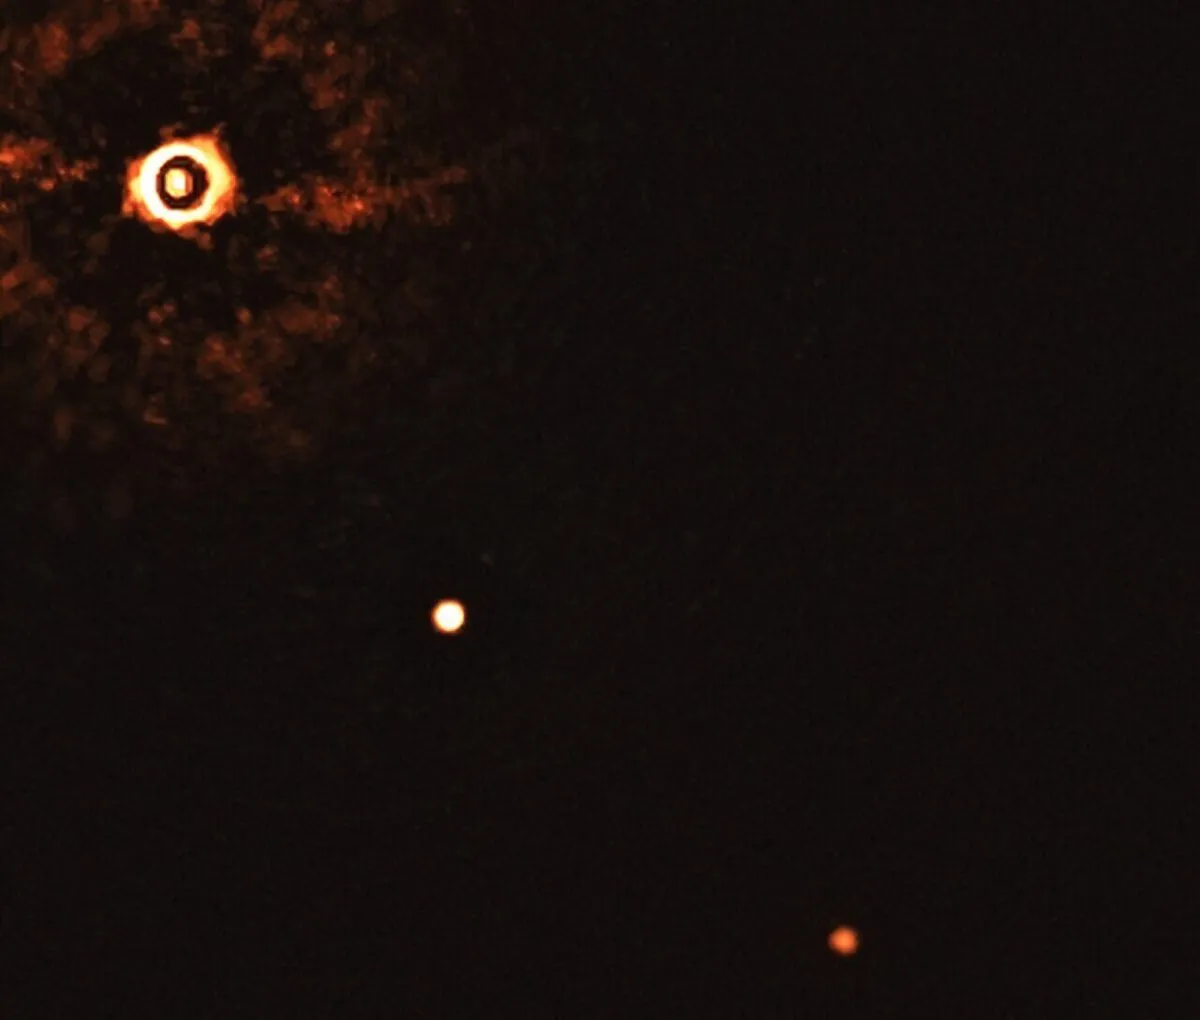 A direct image of 2 exoplanets orbiting a Sun-like star. The planets are TYC 8998-760-1 b and c, and can be seen middle and lower right. Credit: ESO/Bohn et al.